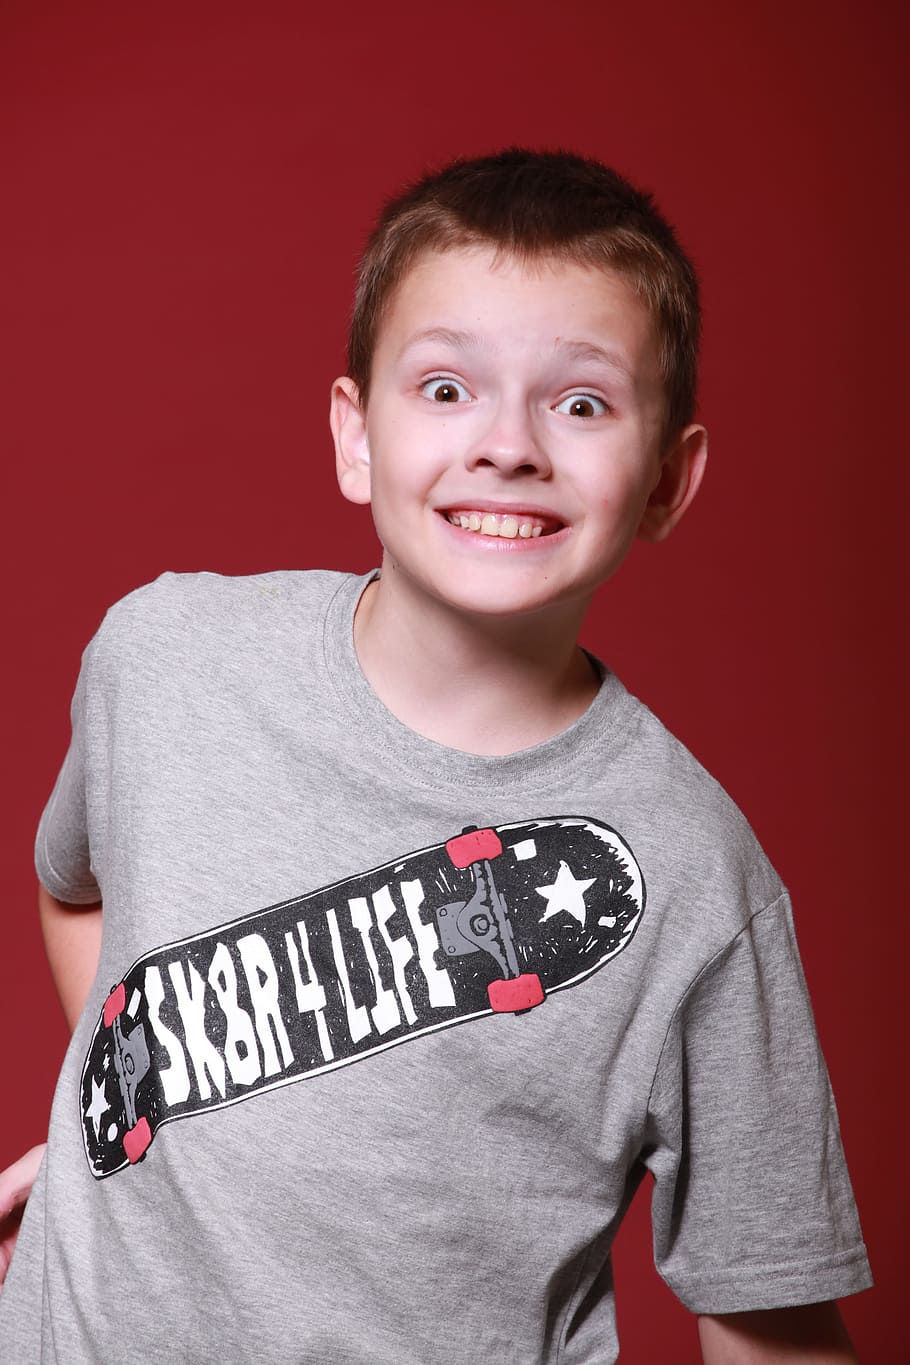 boy, teen, schoolboy, surprise, the jitters, looking at camera, portrait, studio shot, red, colored background